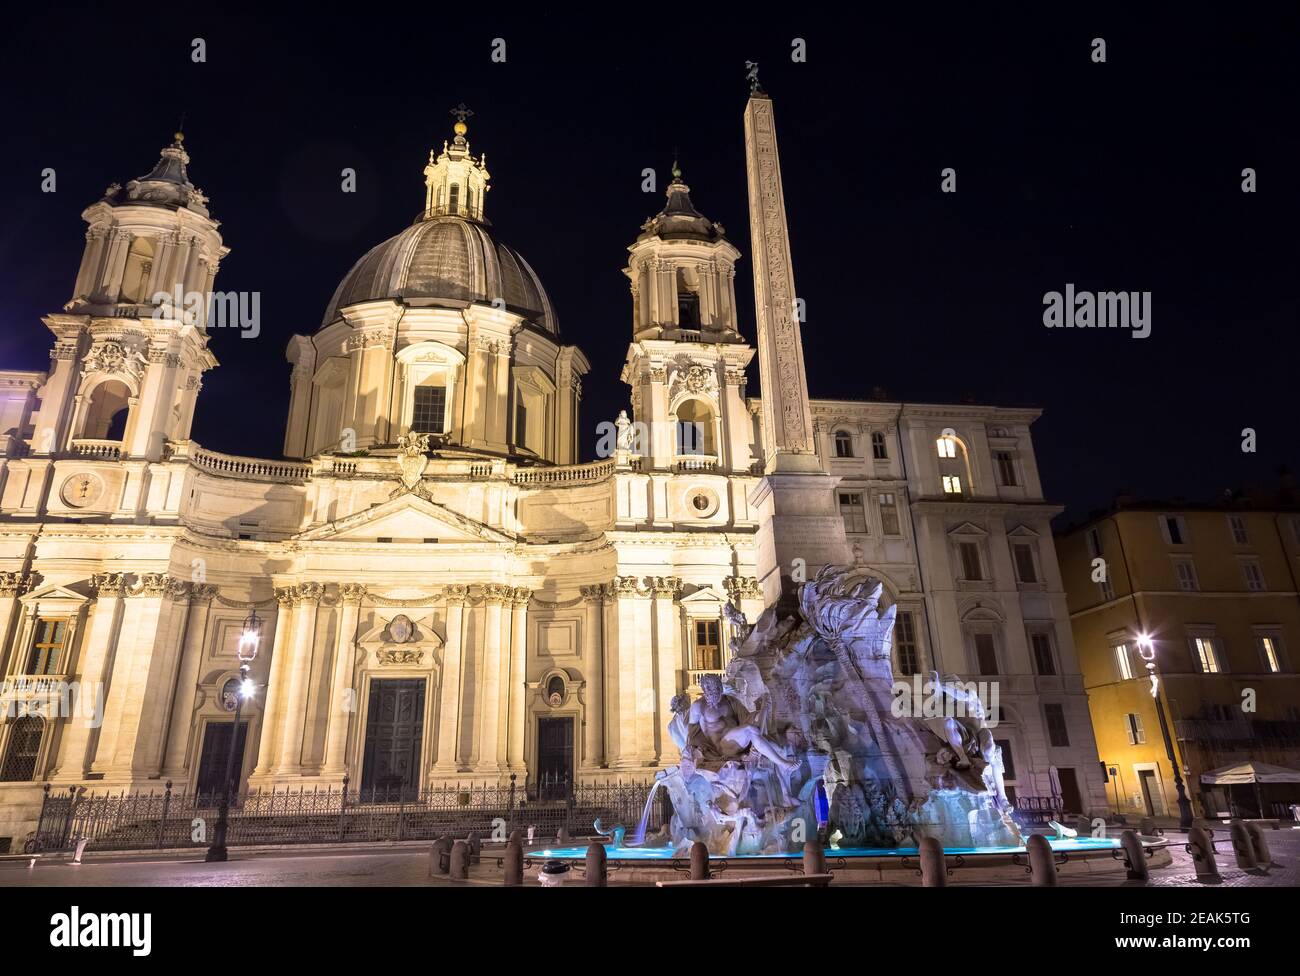 Piazza Navona (Navona's Square), in Rome, Italy, with the famous ...